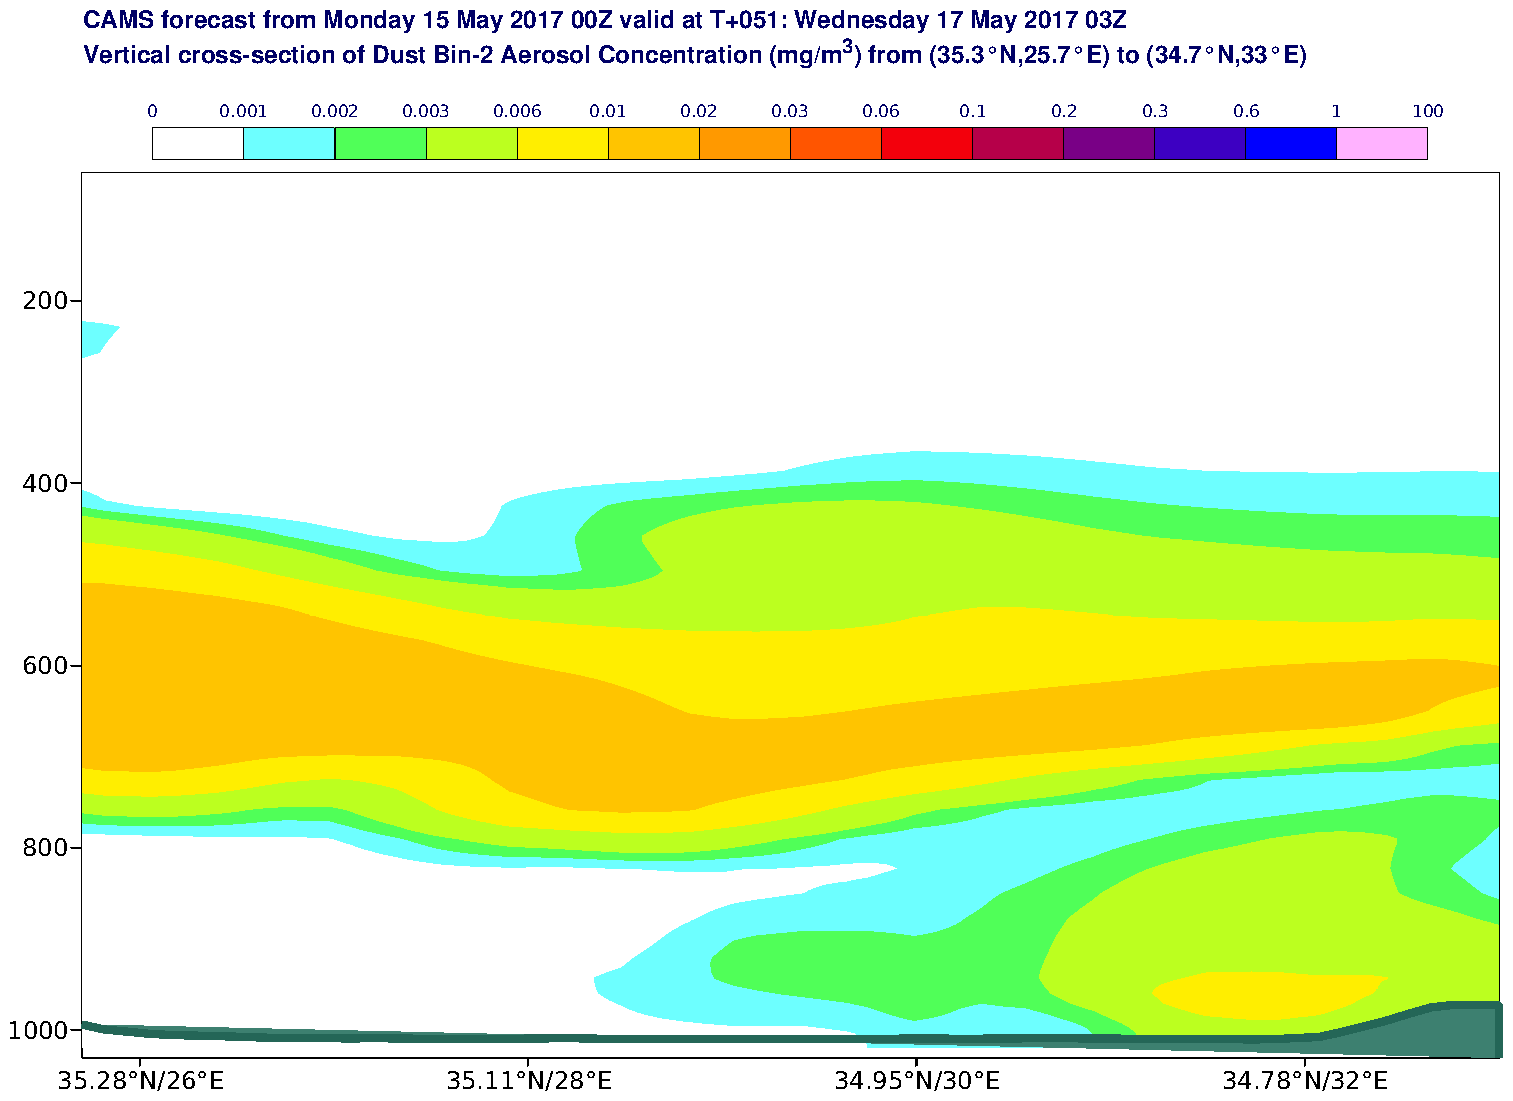 Vertical cross-section of Dust Bin-2 Aerosol Concentration (mg/m3) valid at T51 - 2017-05-17 03:00